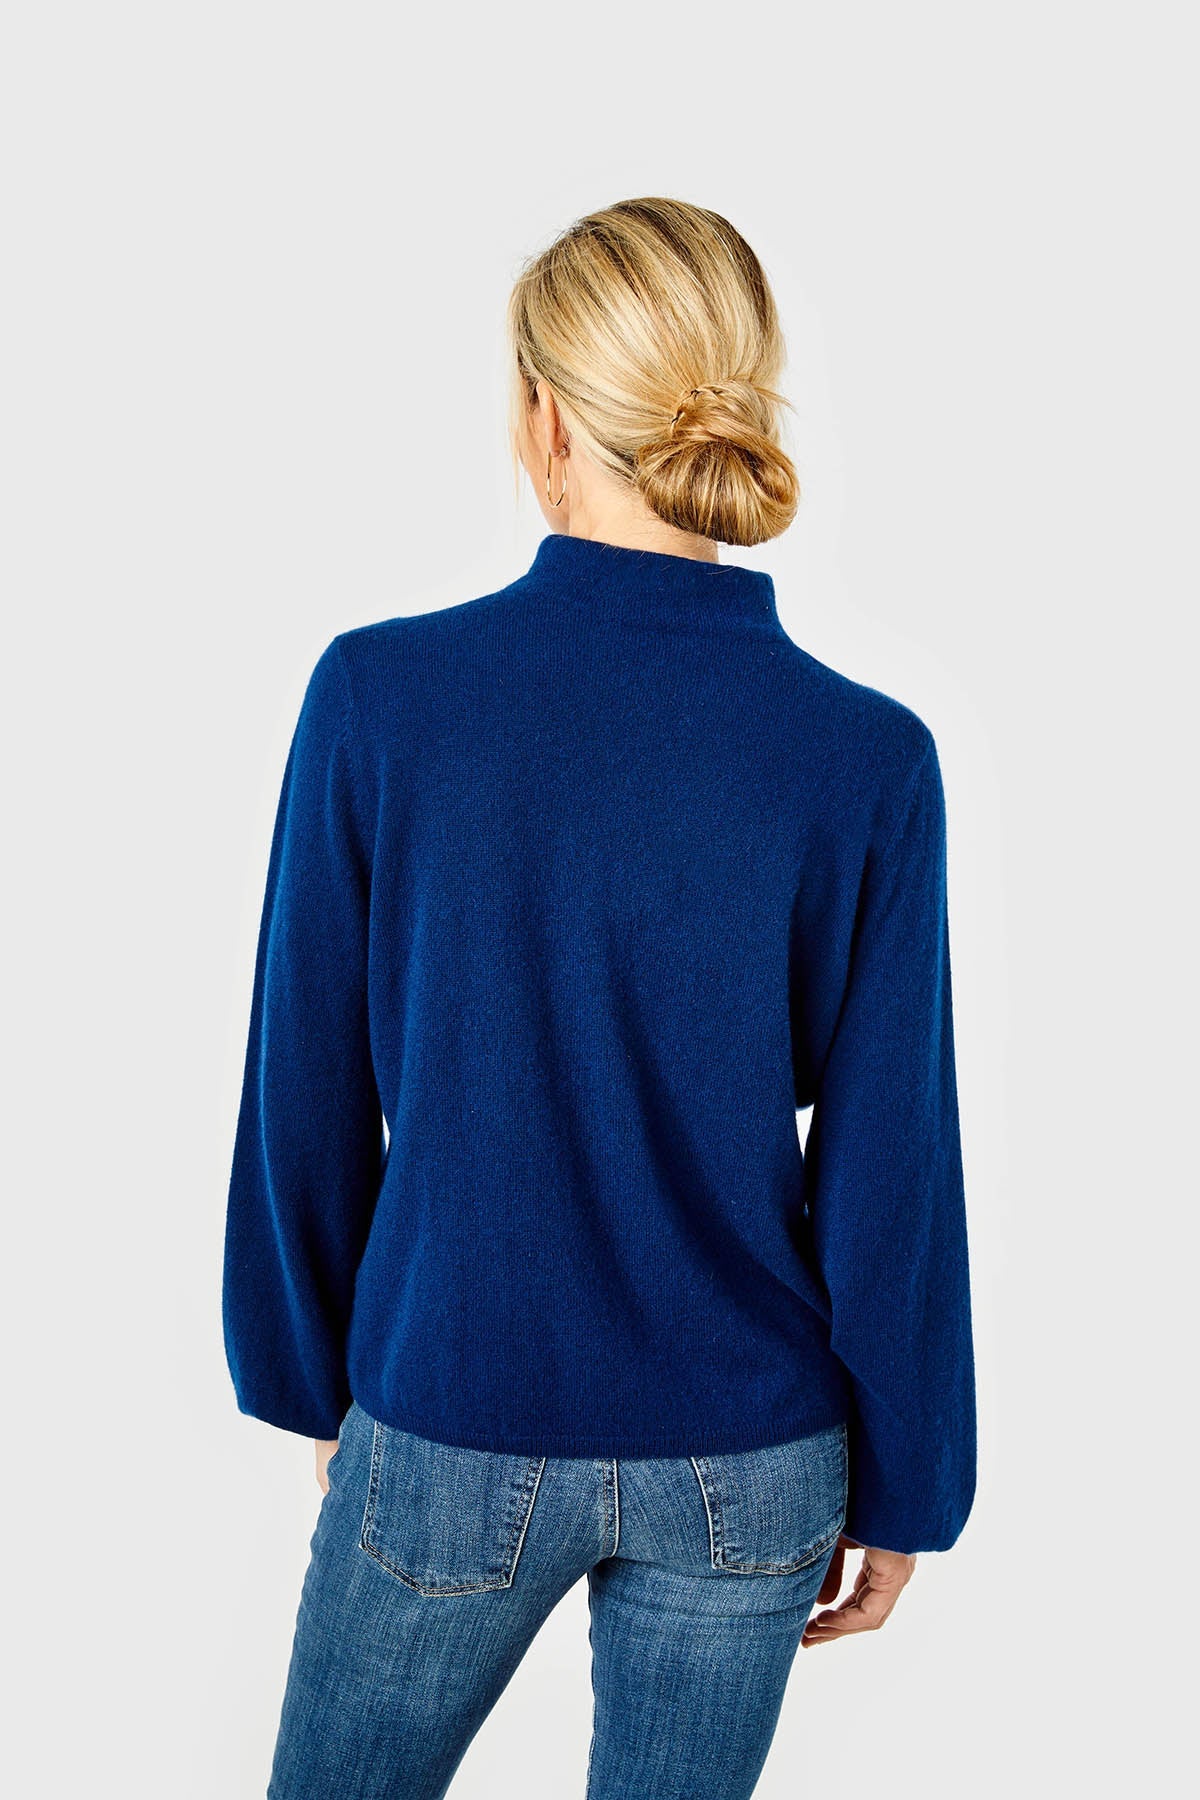 Willow Sweater-Cashmere-Navy by Cartolina